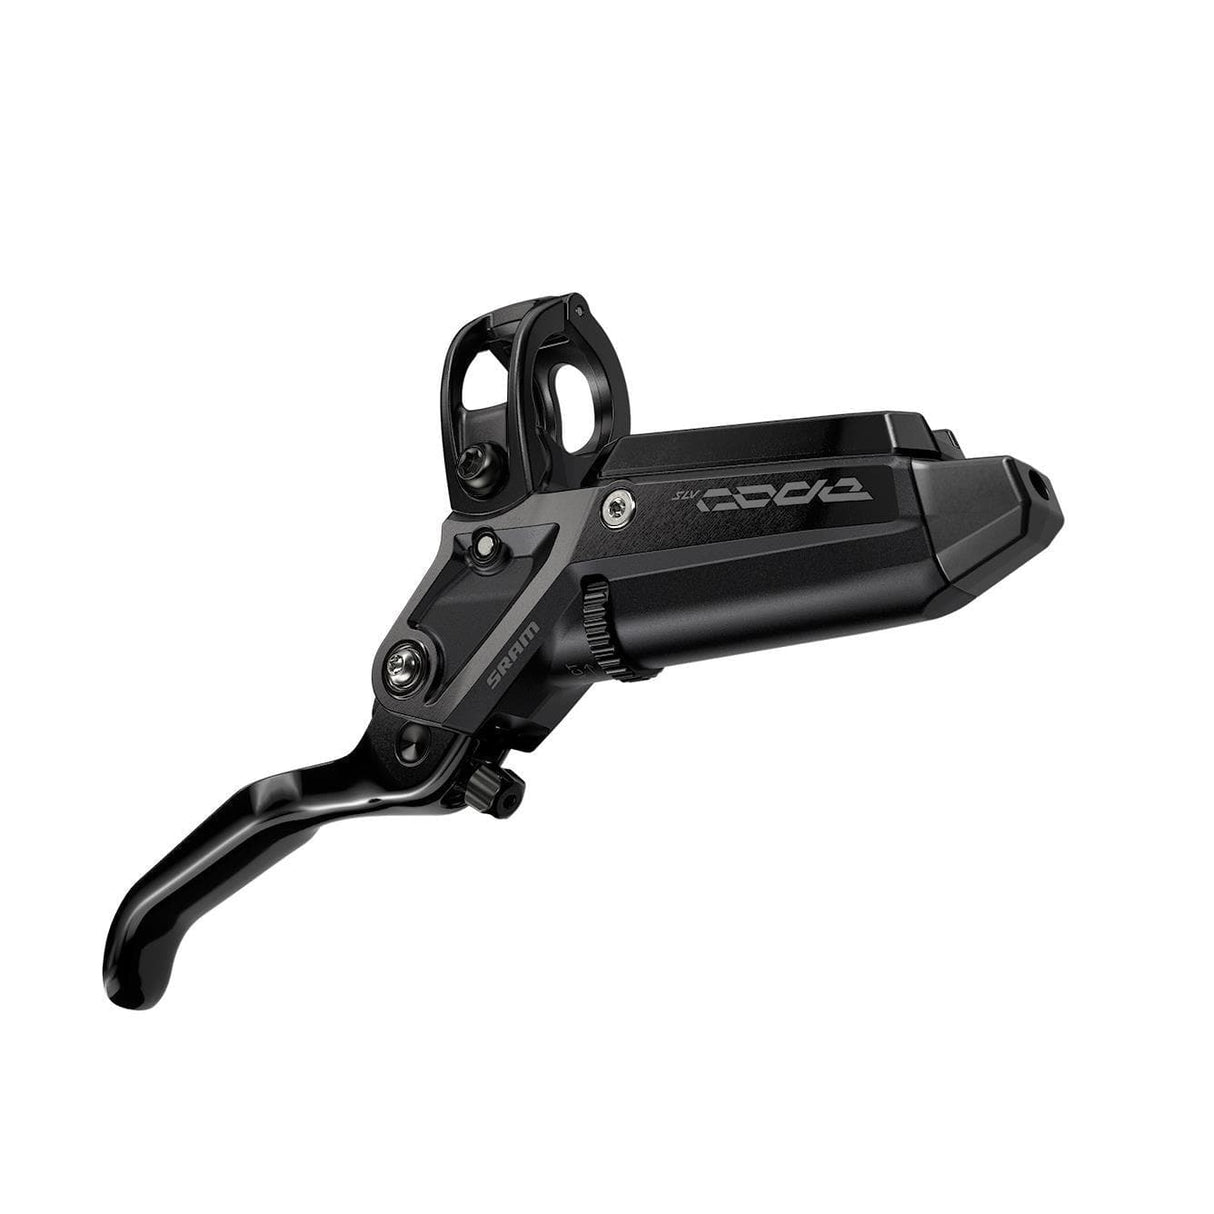 Sram - Disc Brake Code Silver Stealth - Aluminum Lever, Stainless Hardware, Reach/Contact Adj ,Swinglink, Front Hose (Includes Mmx Clamp, Rotor/Bracket Sold Separately)C1: Black Ano 950Mm